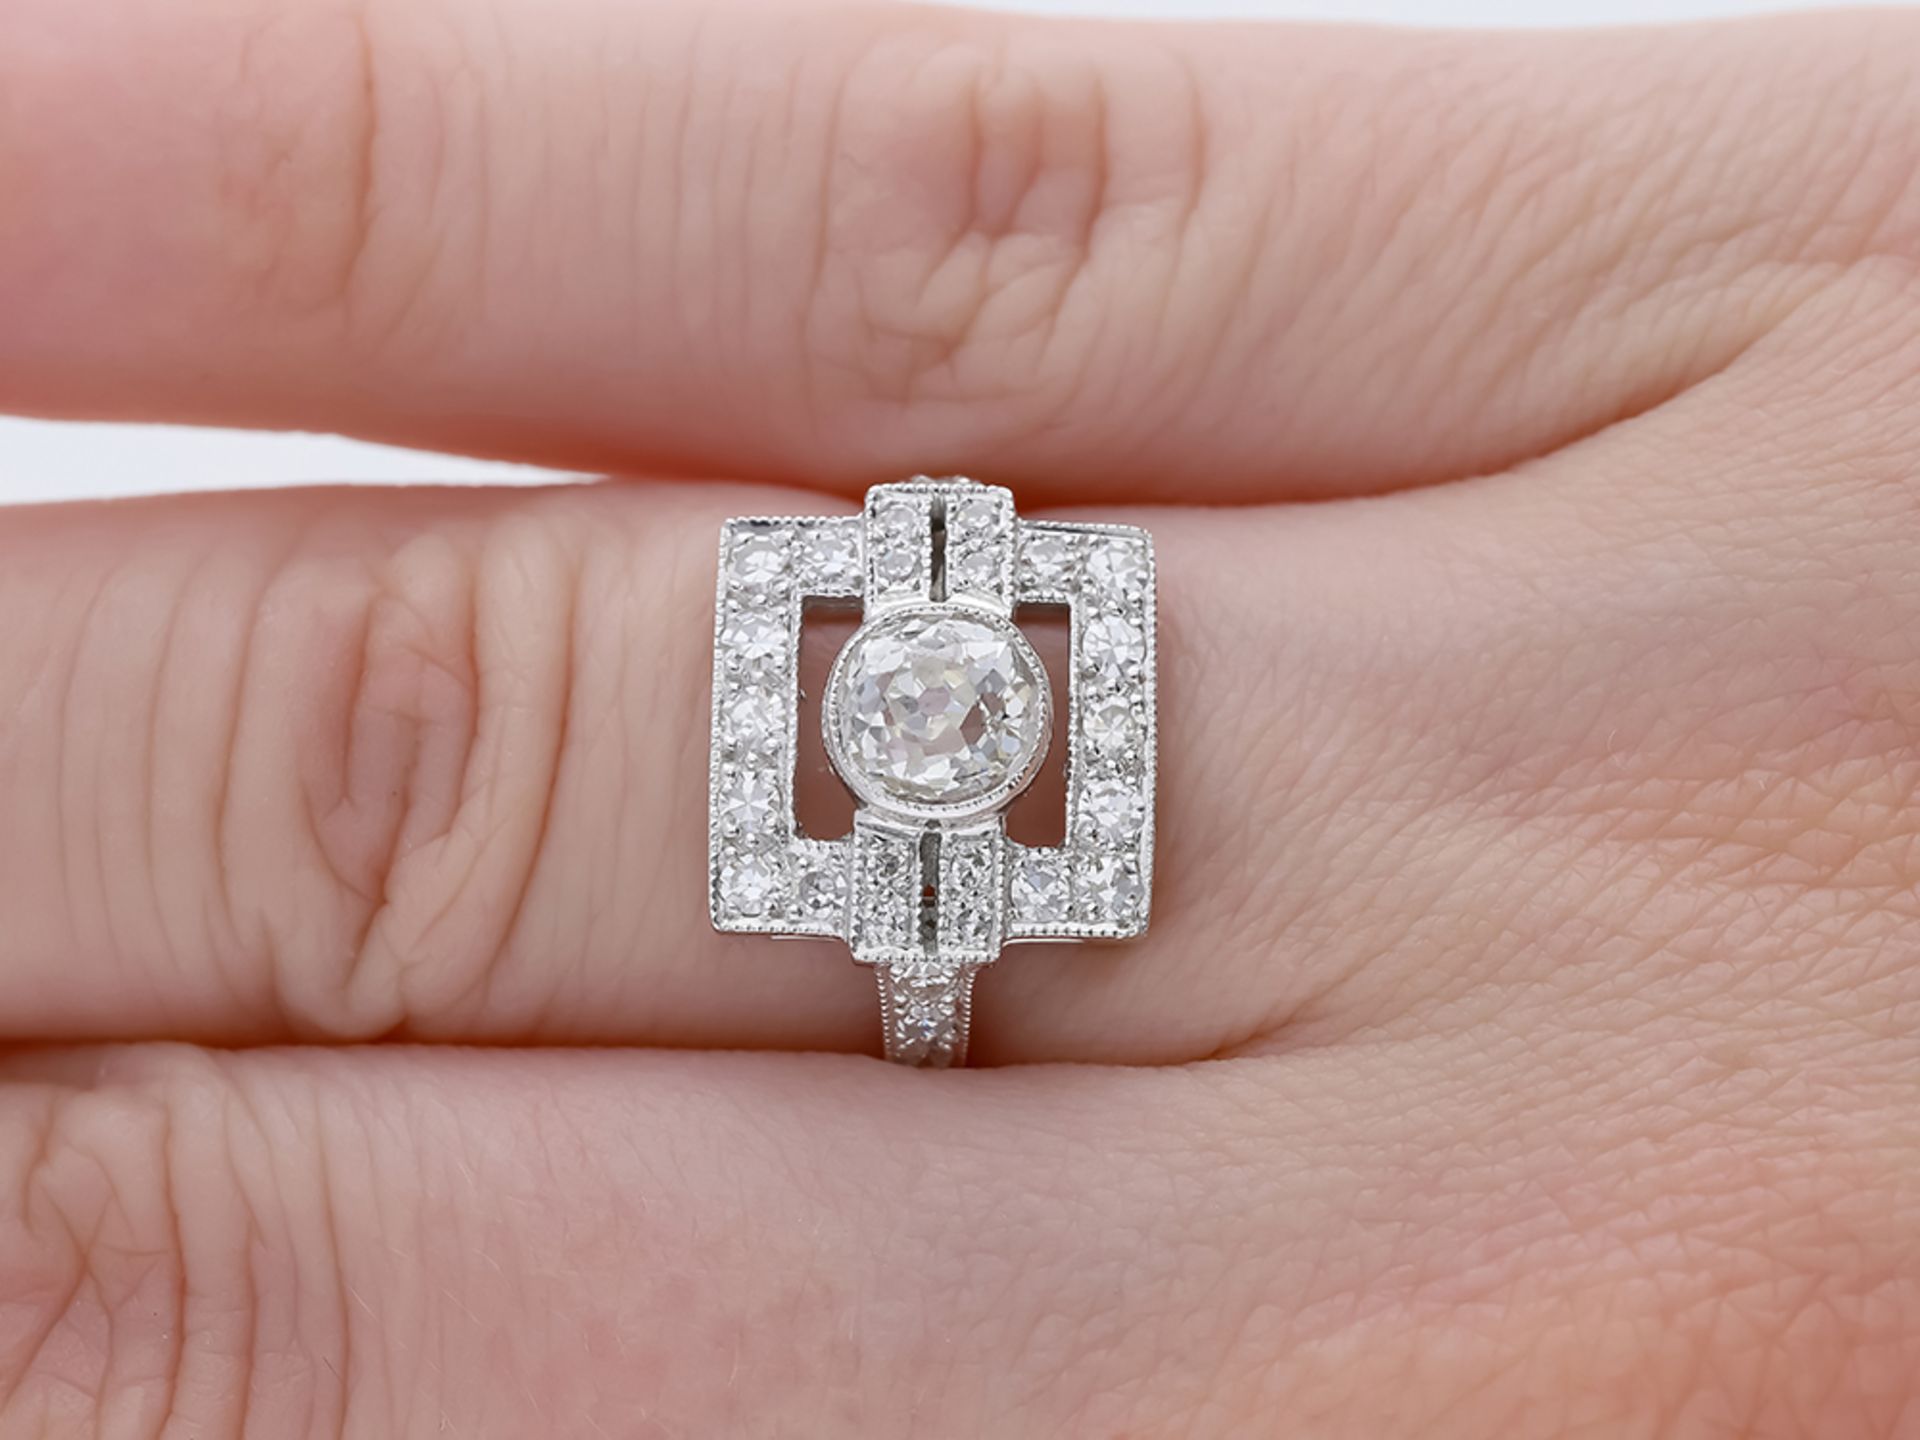 Ring in 750 white gold with 29 diamonds - Image 5 of 6